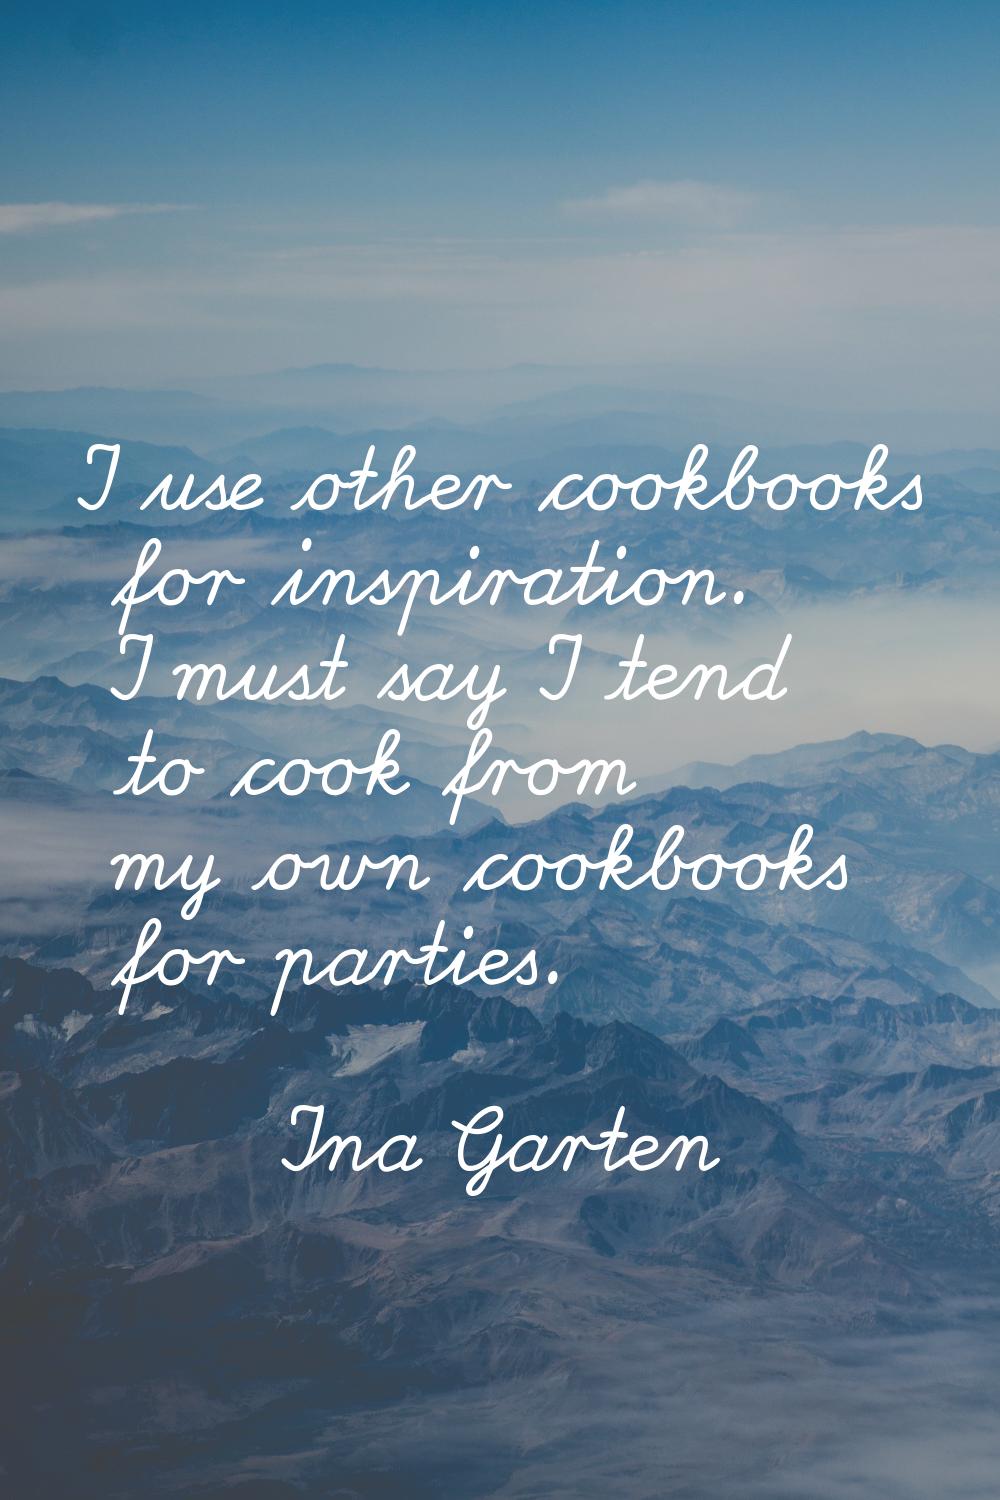 I use other cookbooks for inspiration. I must say I tend to cook from my own cookbooks for parties.